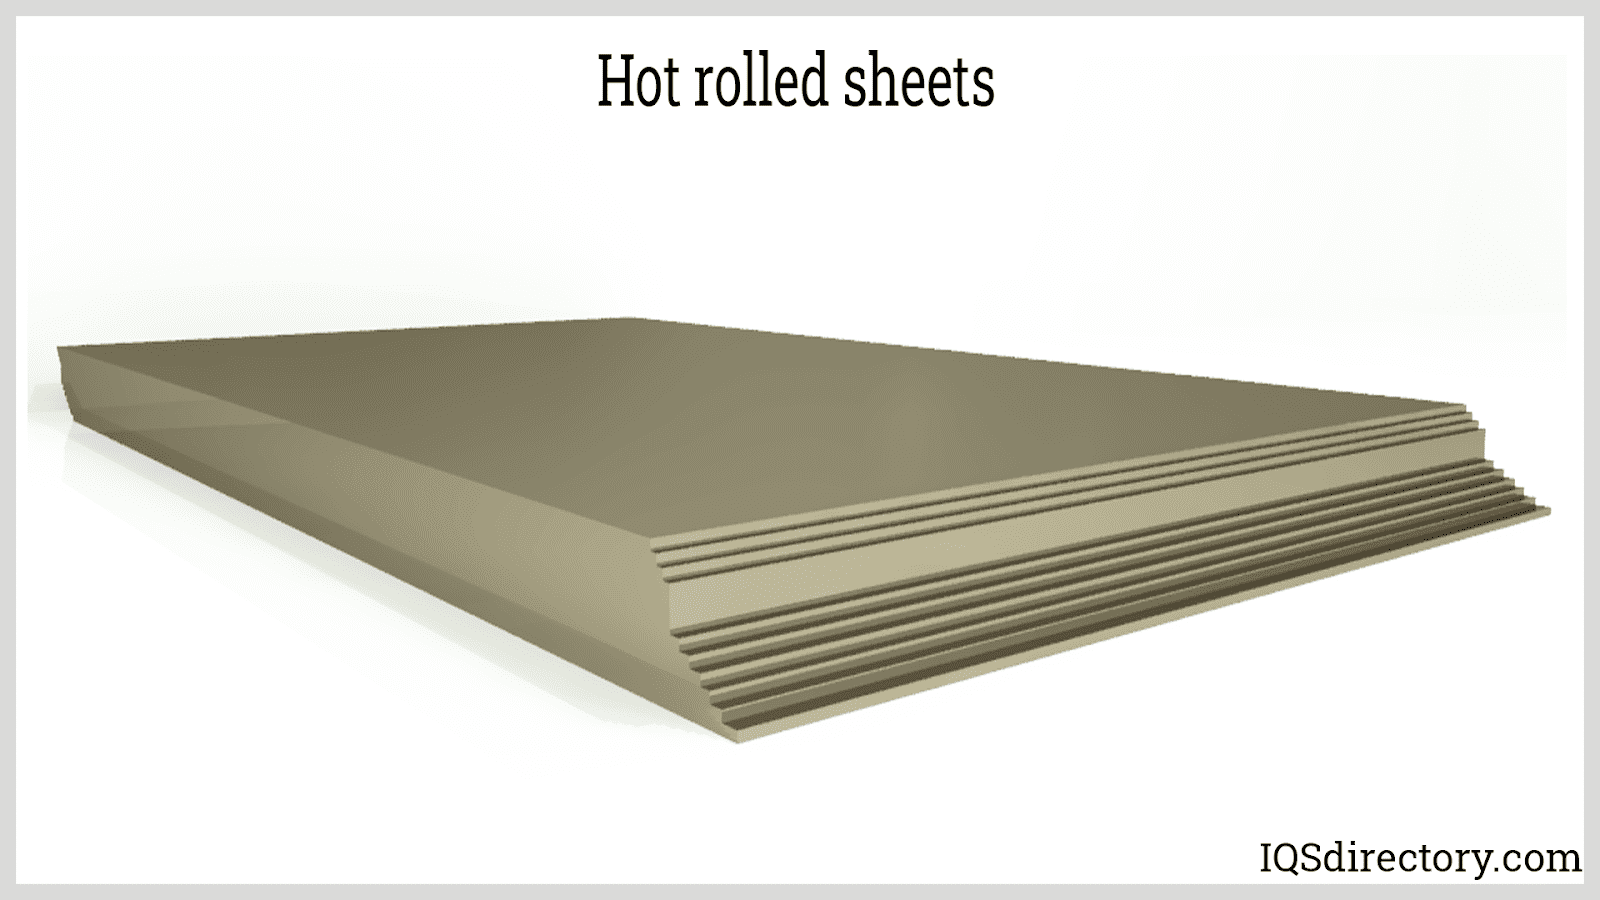 Hot rolled sheets